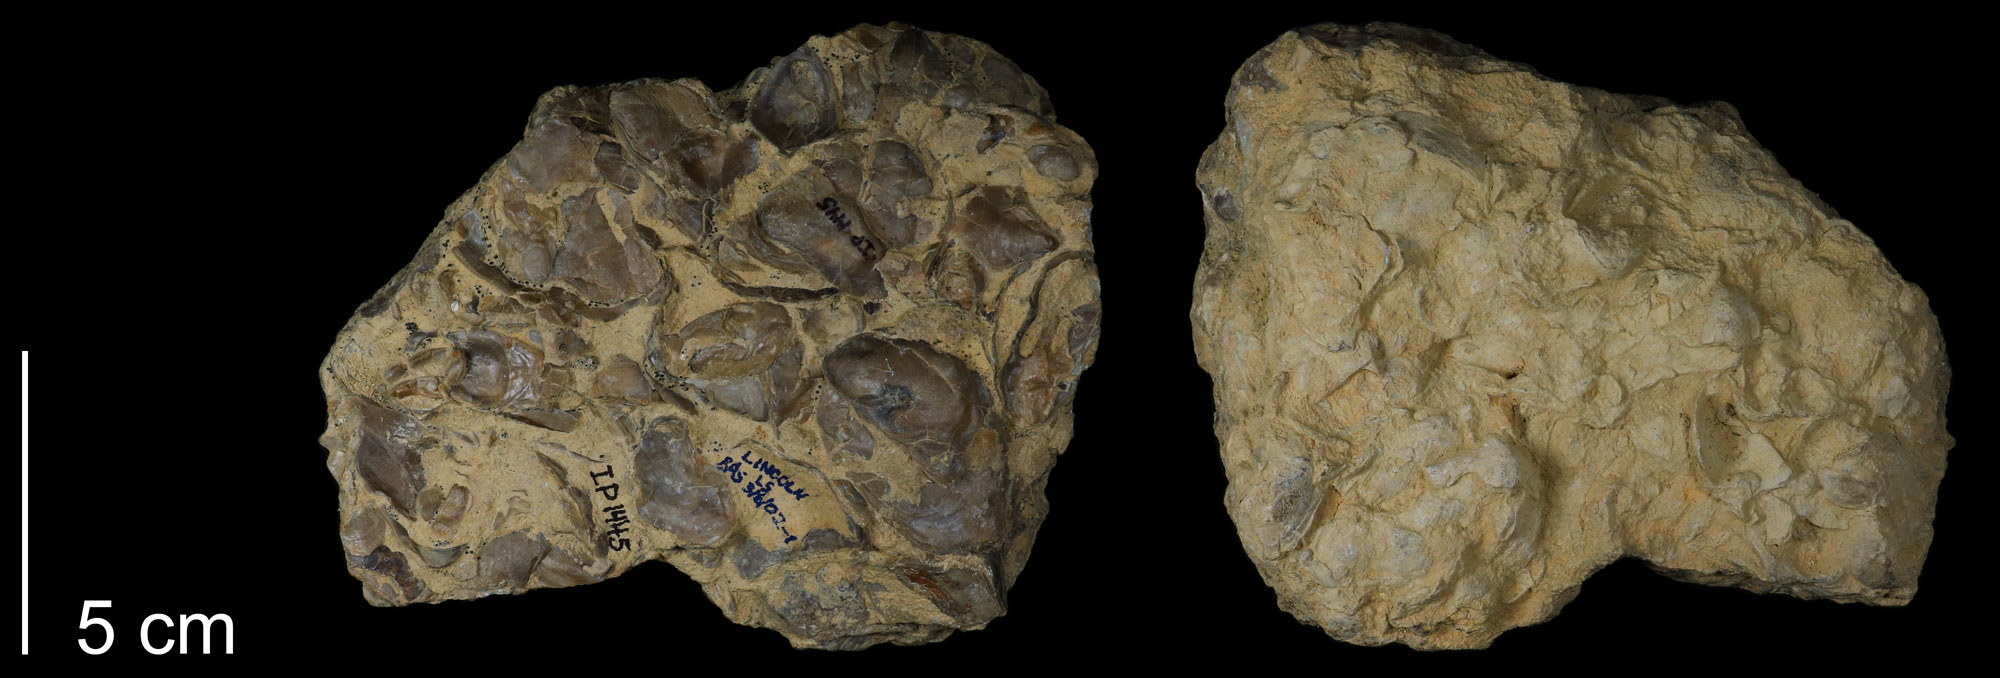 Photograph of a rock preserving multiple Cretaceous oysters from Colorado. The rock is light brown or beige. One one side, dark brown oyster shells can be seen. On the other side, oyster shells blend in with the rock.